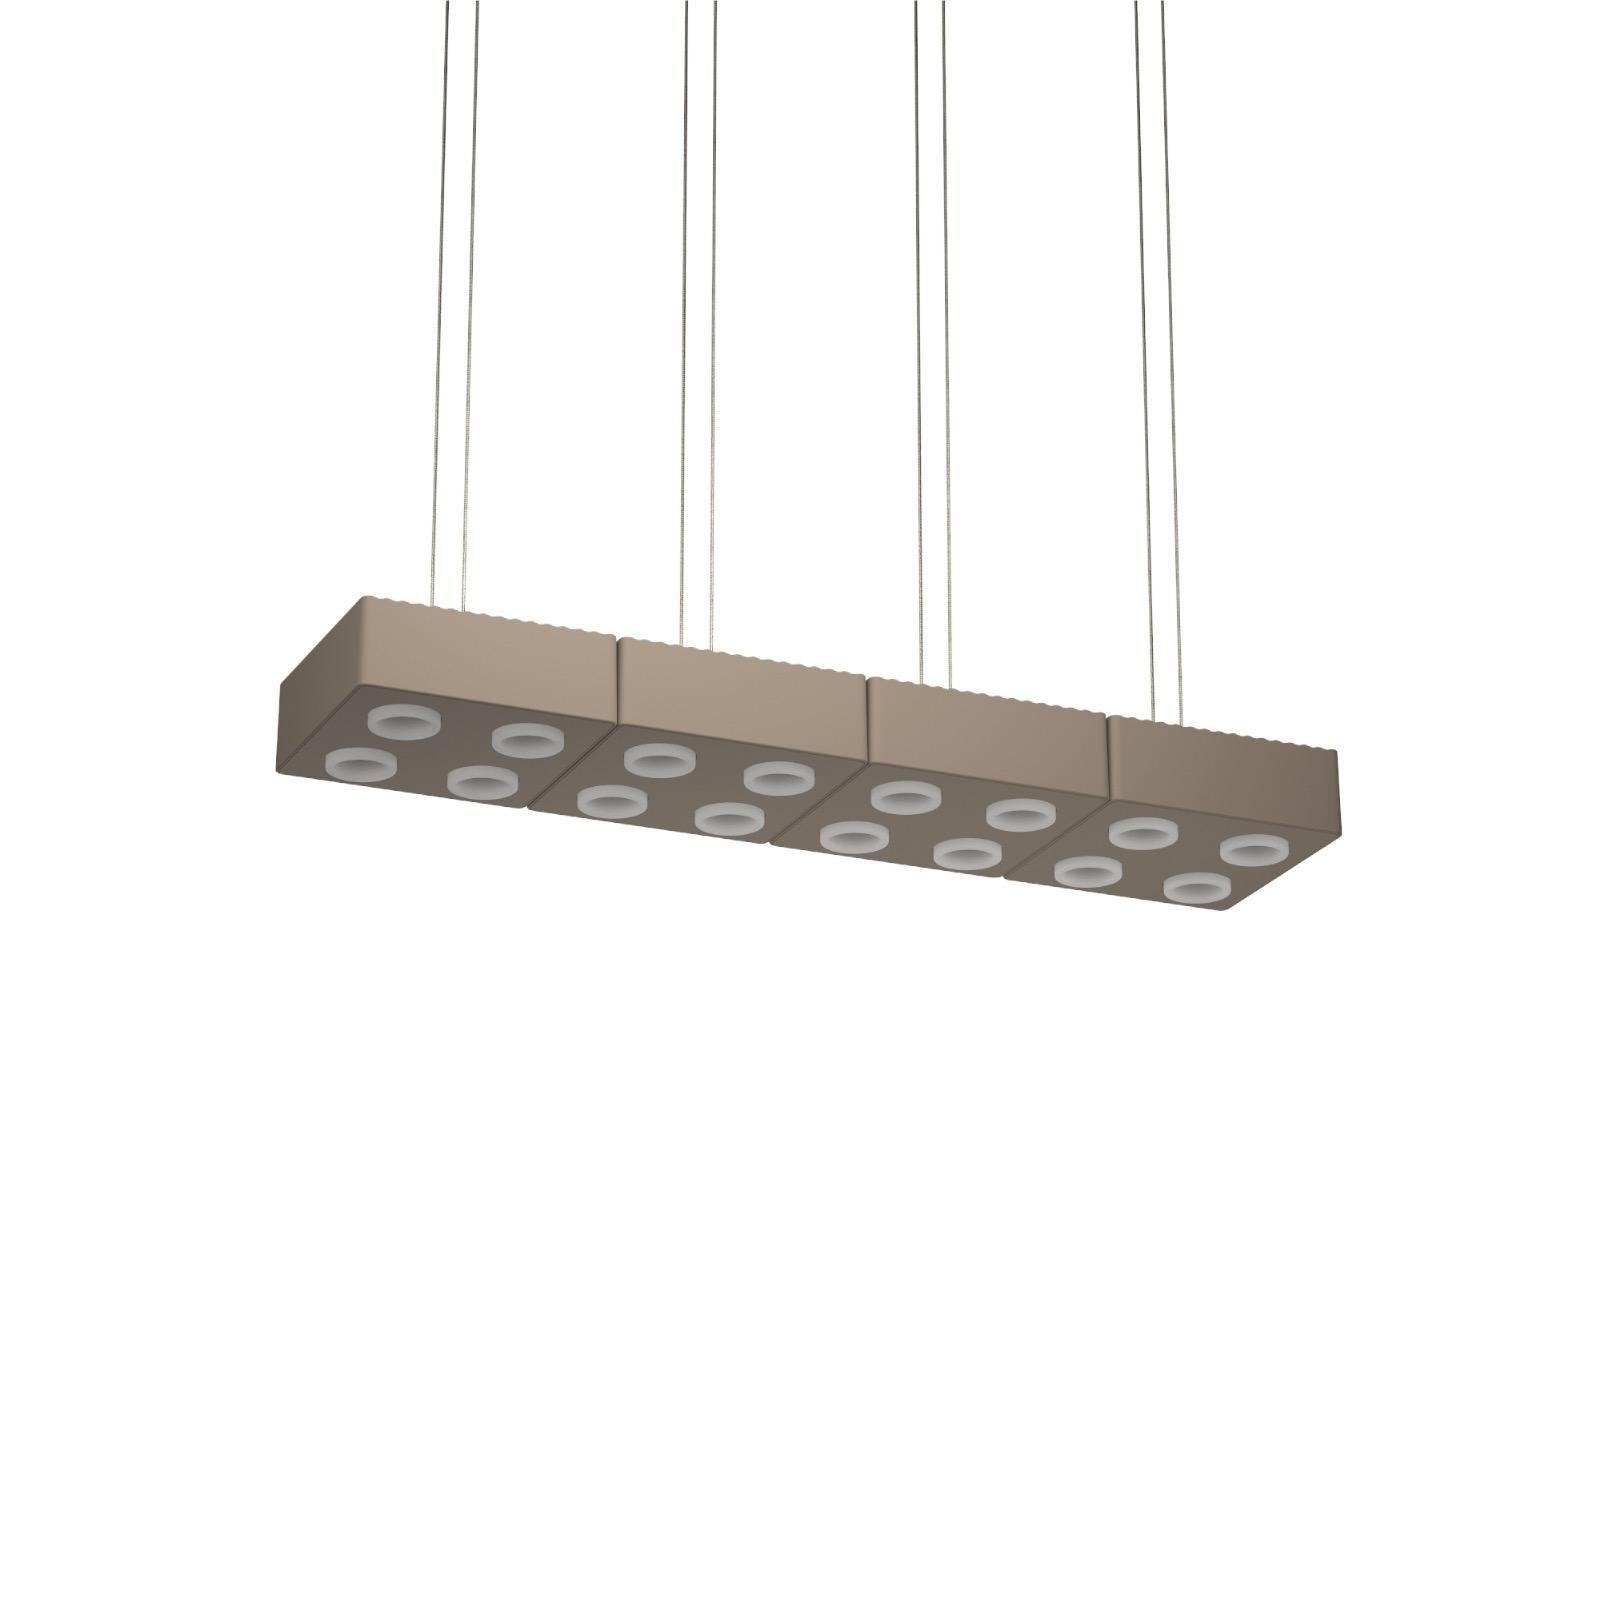 Domino Pendant lamp by Sylvain Willenz x AGO Lighting
Mud Gray - Quad Pendant Lamp

Materials: Aluminum 
Light Source: Integrated LED (COB), DC
Watt. 60 W (15W x 4)
Color temp. 2700 / 3000K
Cable Length: 3m 

Available colors:
Charcoal,